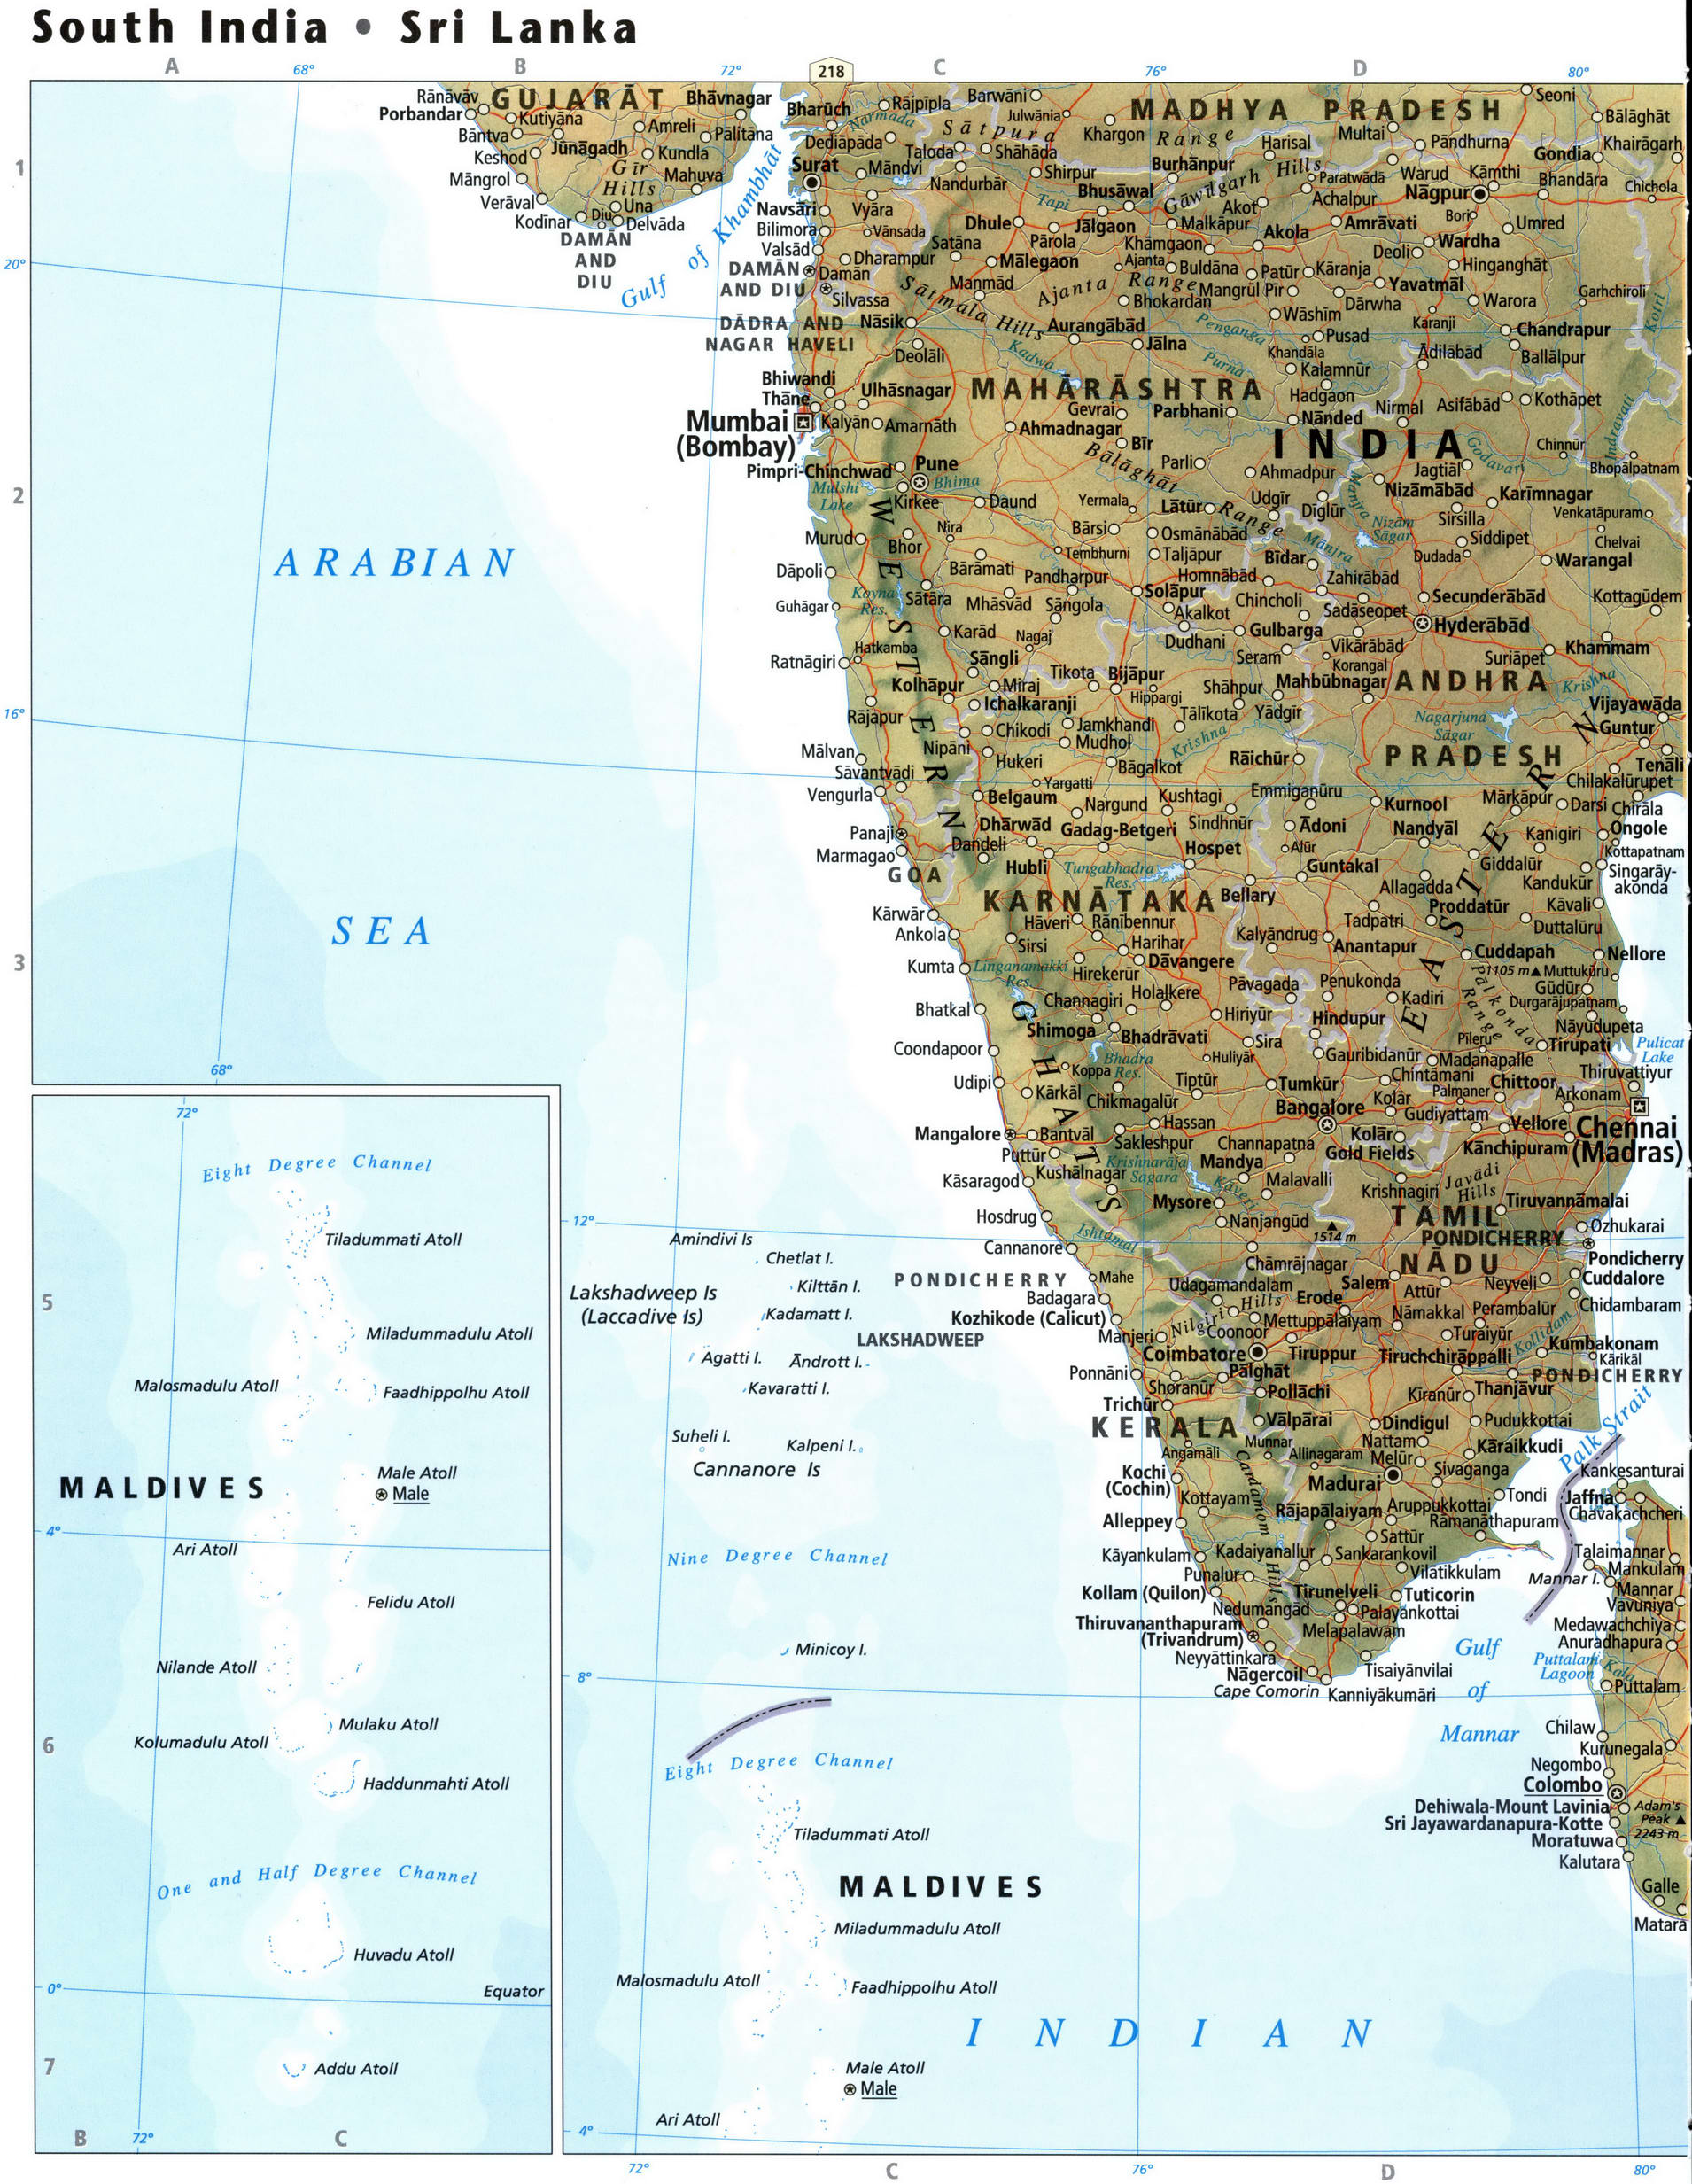 Southern India physical map